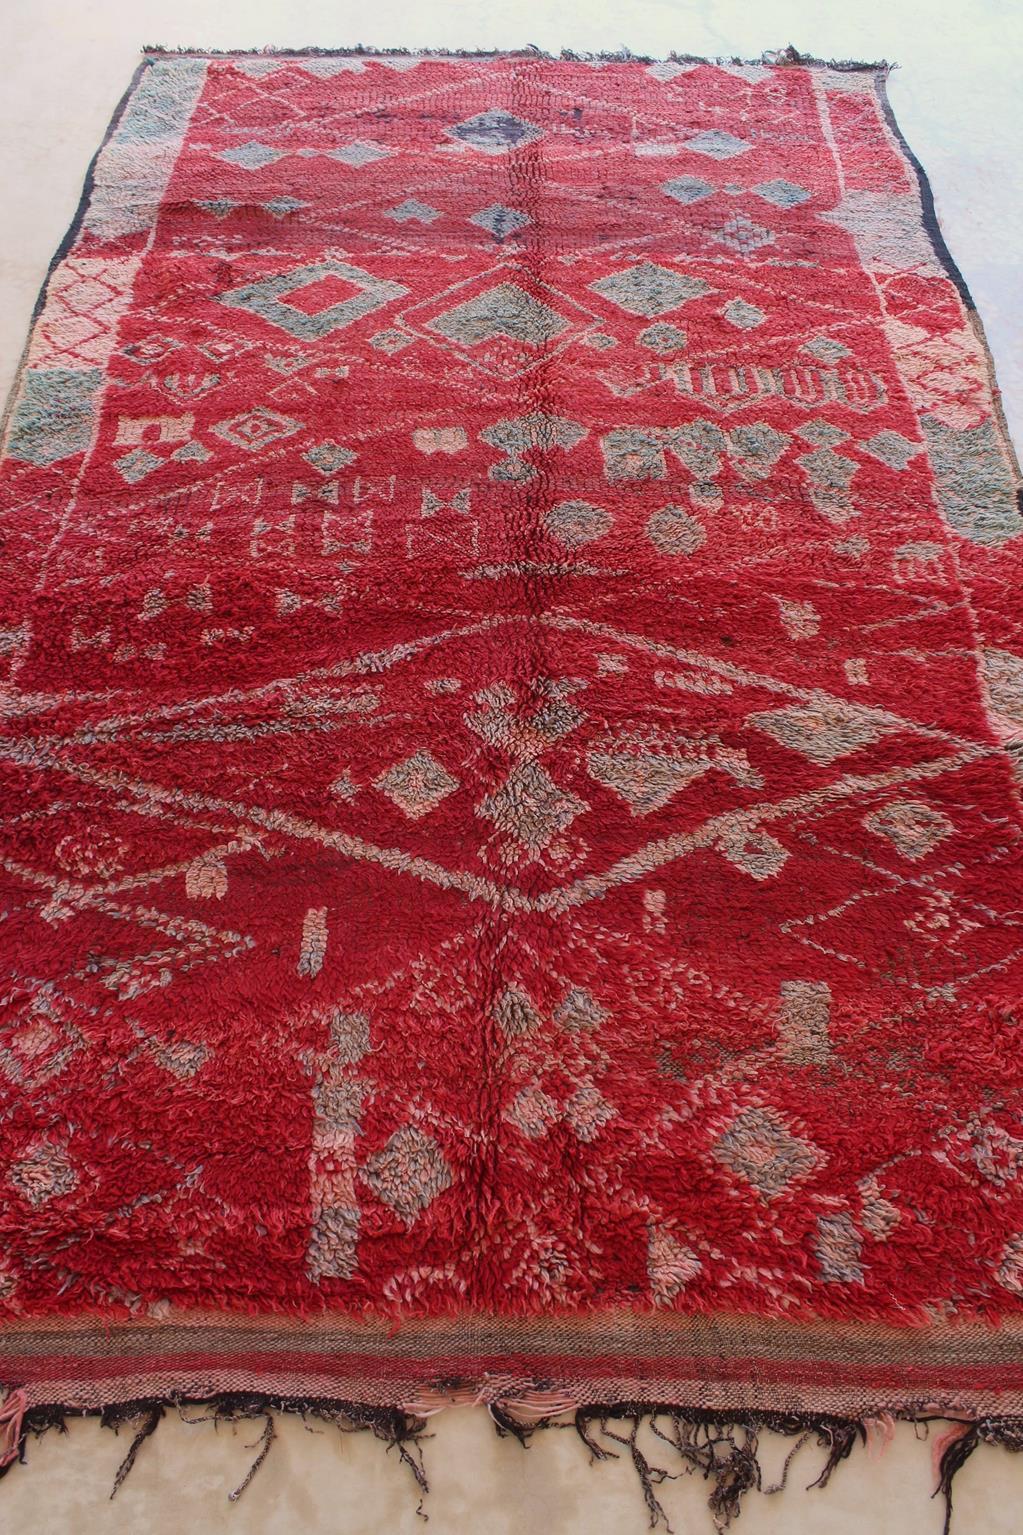 20th Century Vintage Moroccan Zayane rug - Red/green - 7x12feet / 213x365cm For Sale